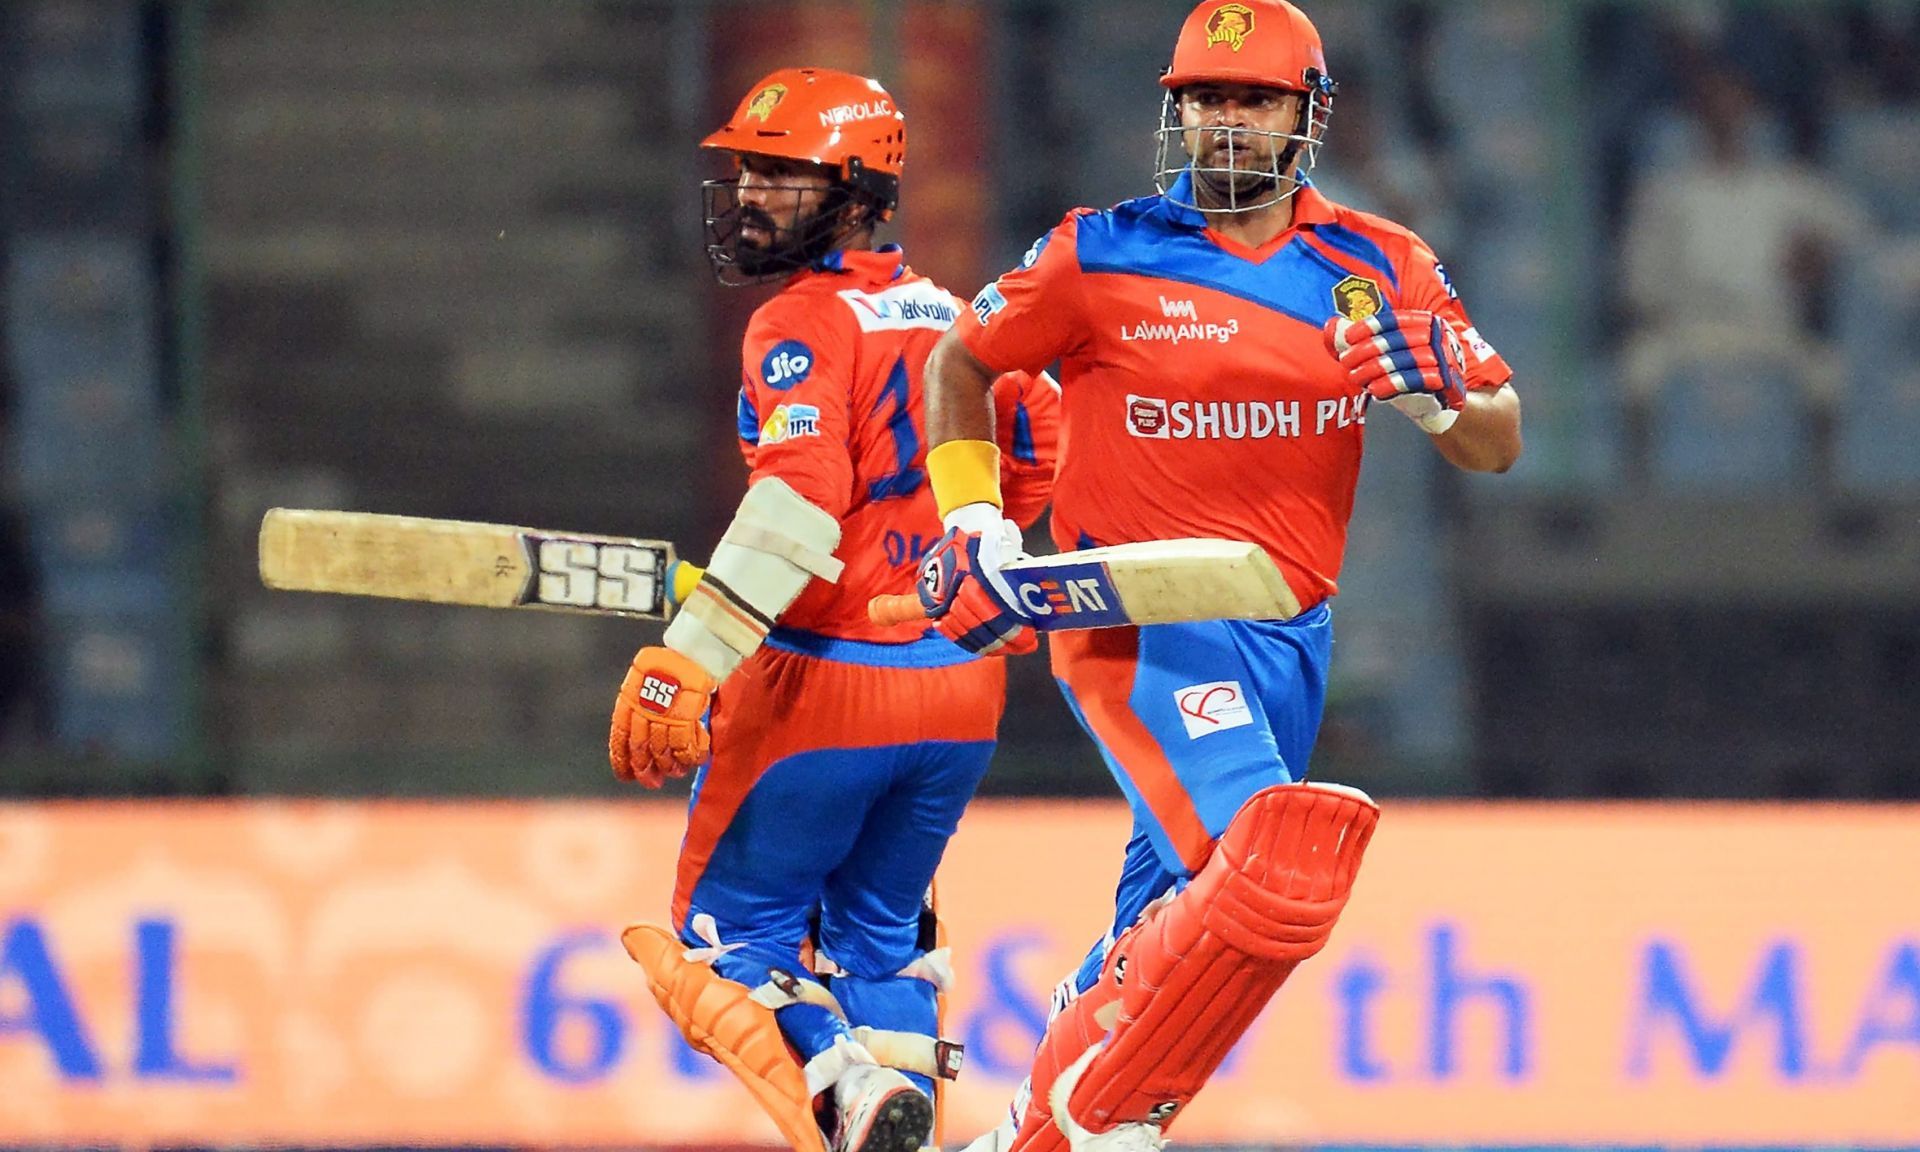 Suresh Raina (R) and Dinesh Karthik (L) played together in IPL for Gujarat Lions. (Picture Courtesy: Dawn)